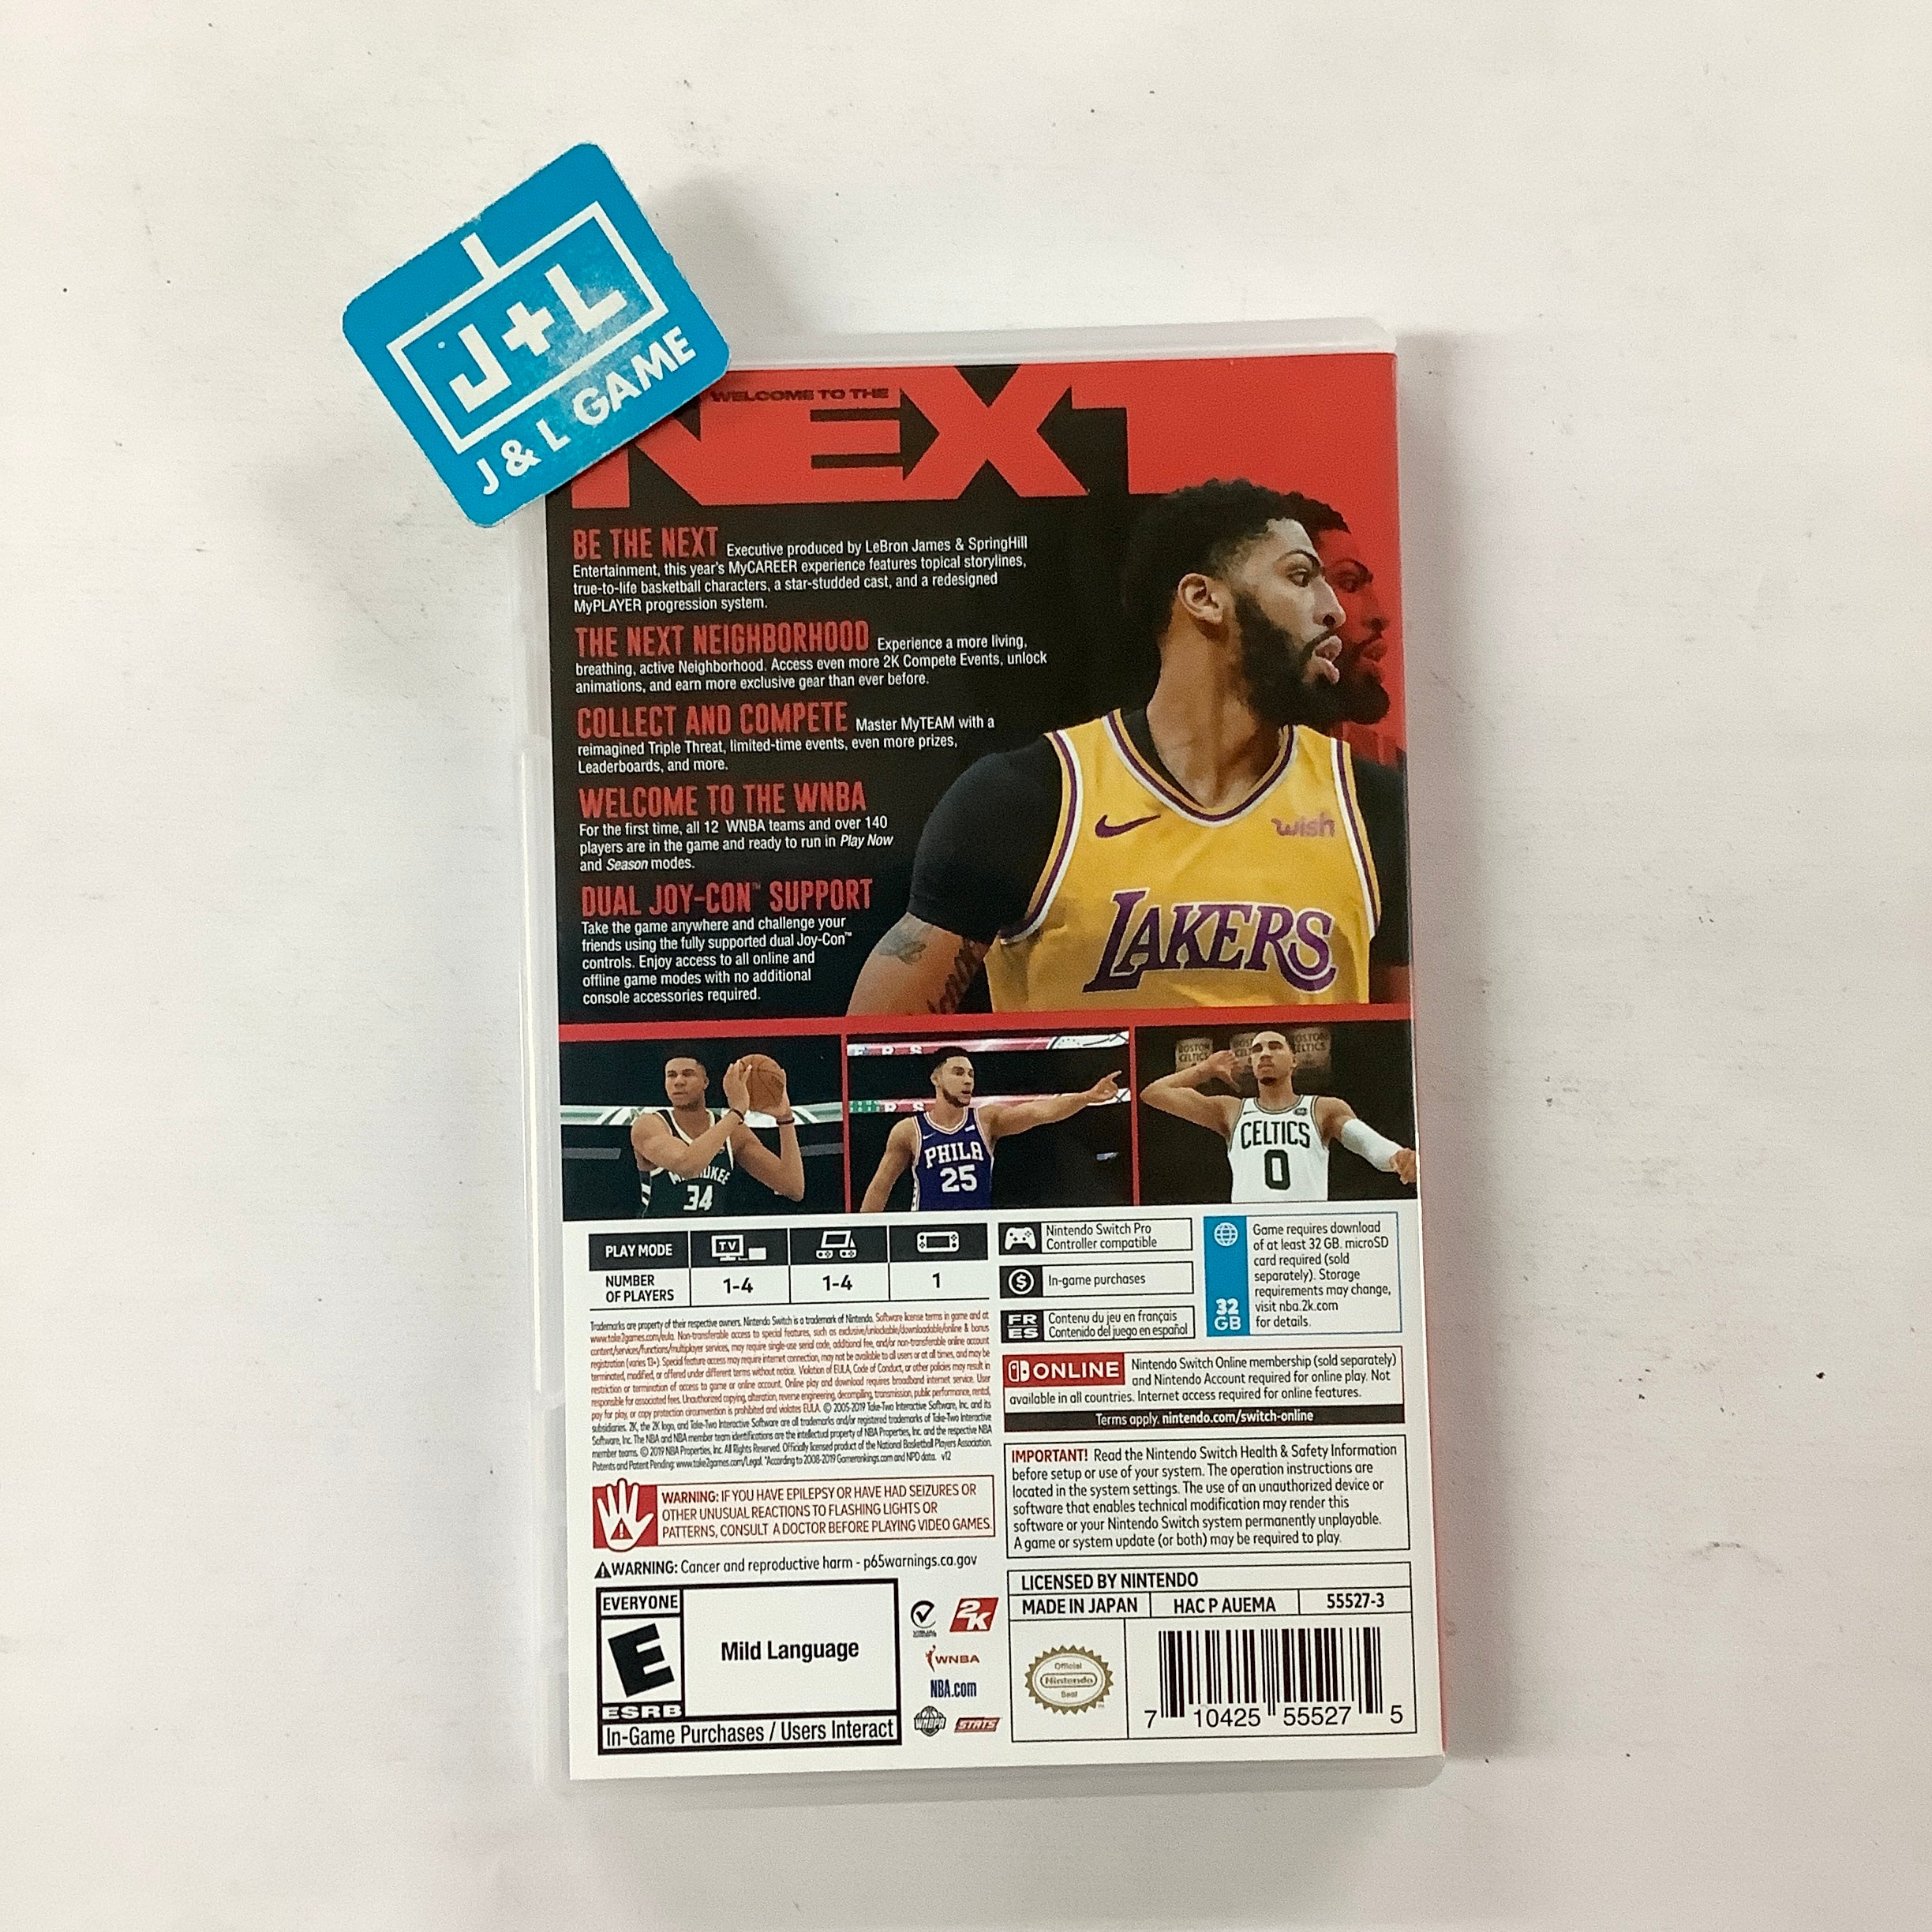 NBA 2K20 - (NSW) Nintendo Switch [Pre-Owned] Video Games 2K GAMES   